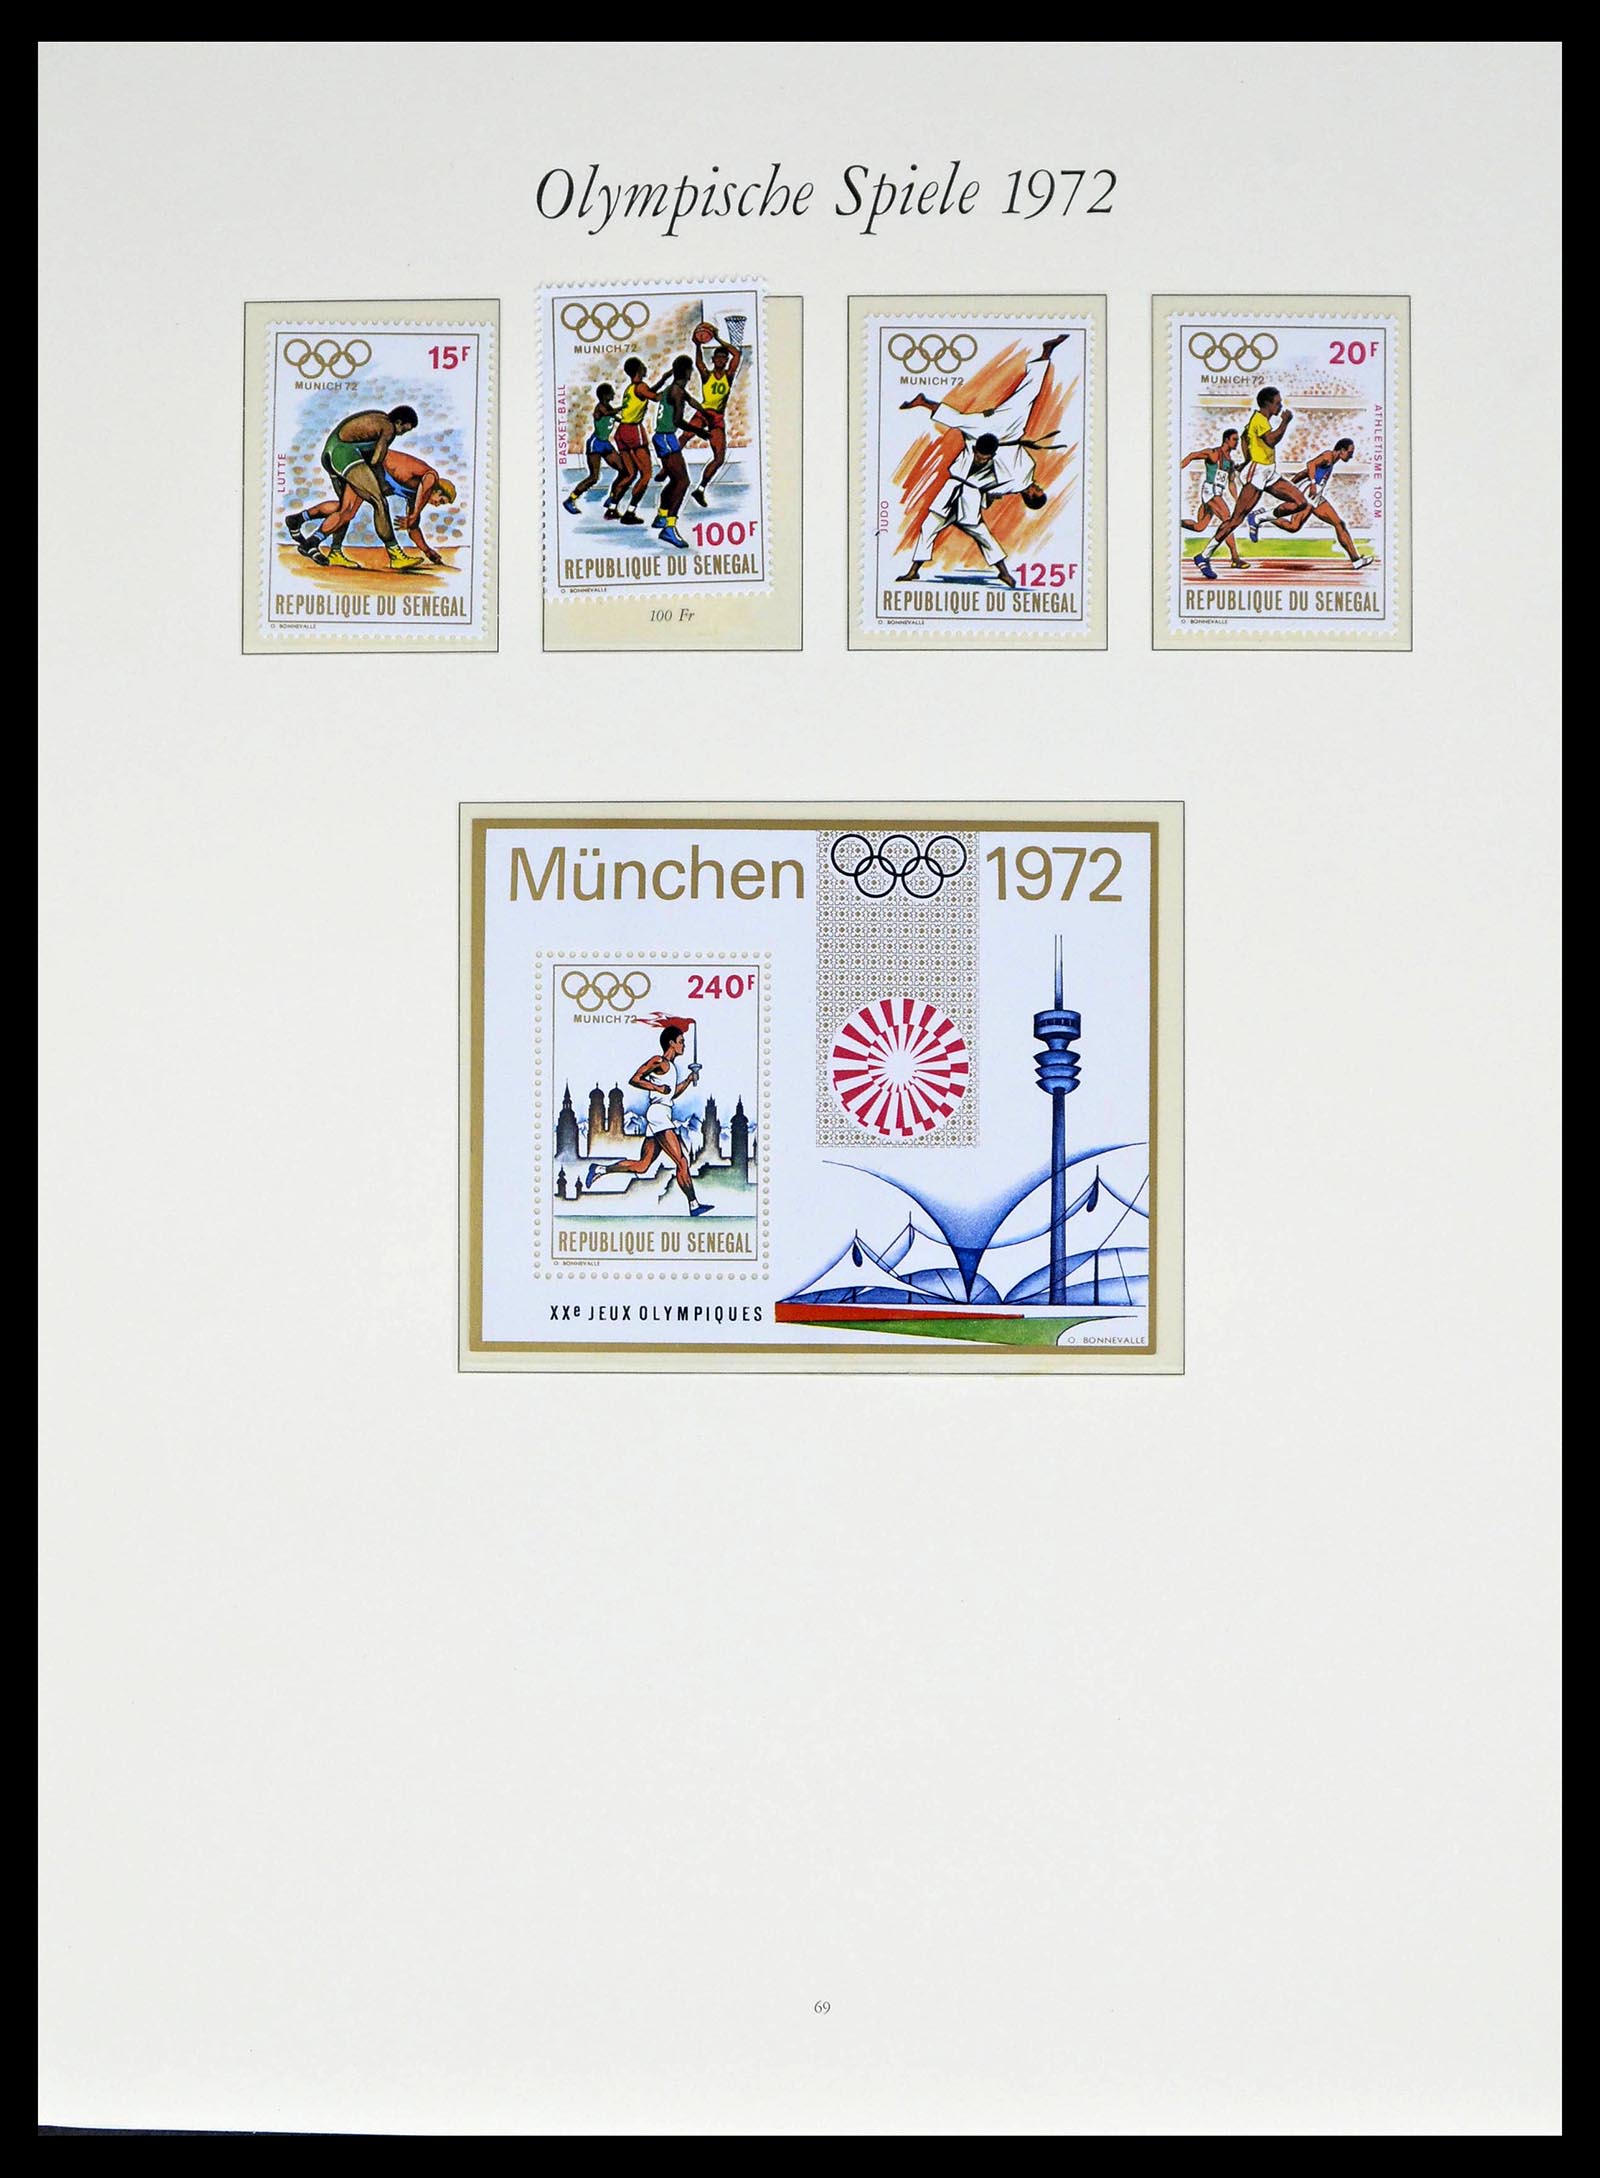 39237 0013 - Stamp collection 39237 Olympics 1972.